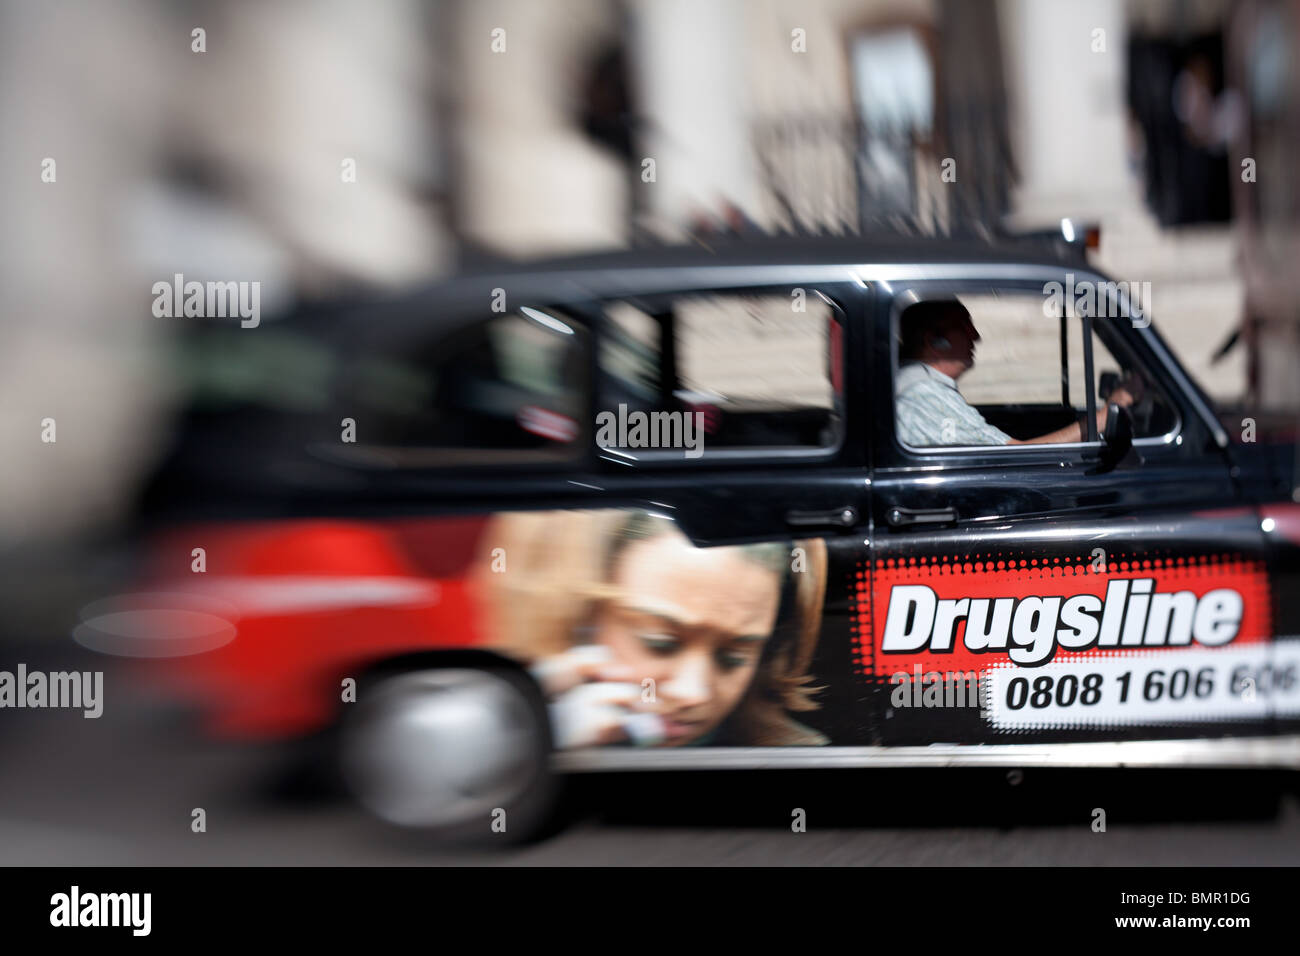 A black cab with an advert for Drugsline, a help line for people with problems with drugs in London, England. Stock Photo